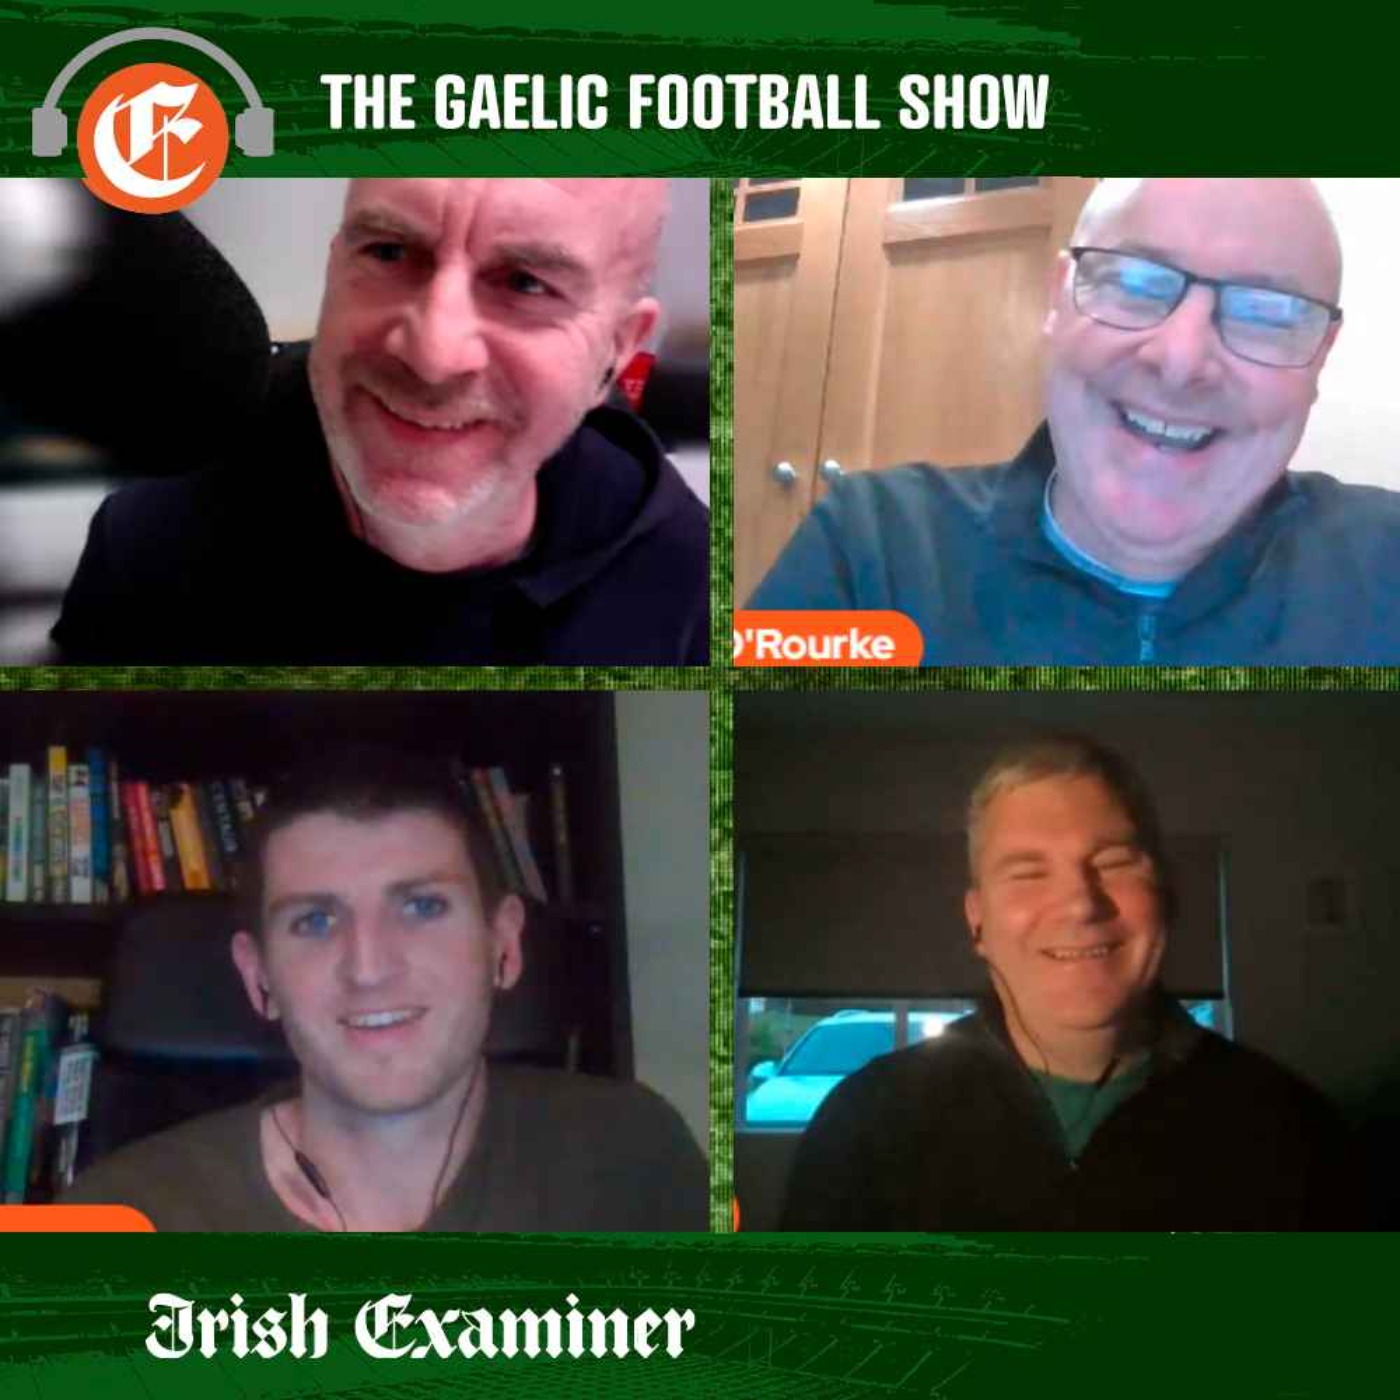 The Gaelic Football Show: a thrilling Ulster championship clash